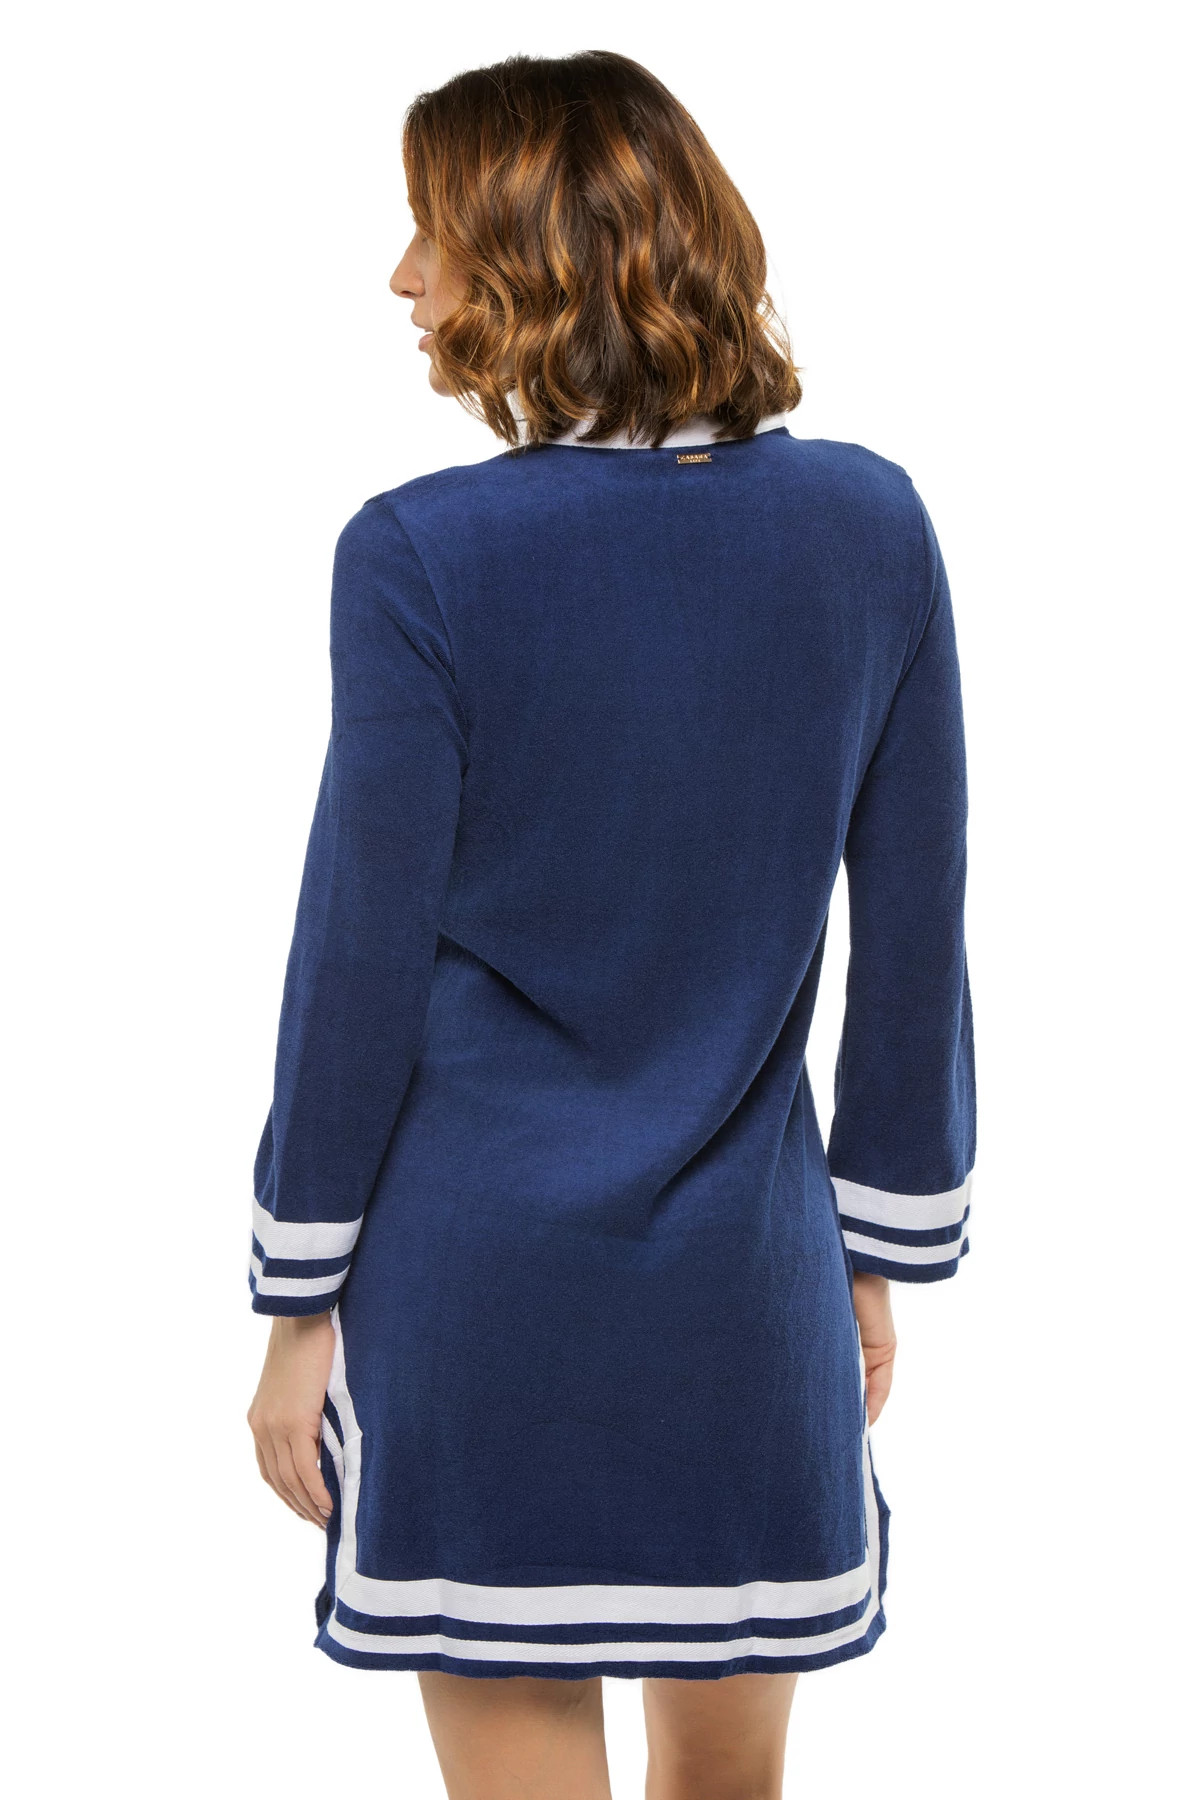 NAVY Terry Long Sleeve Tunic image number 2